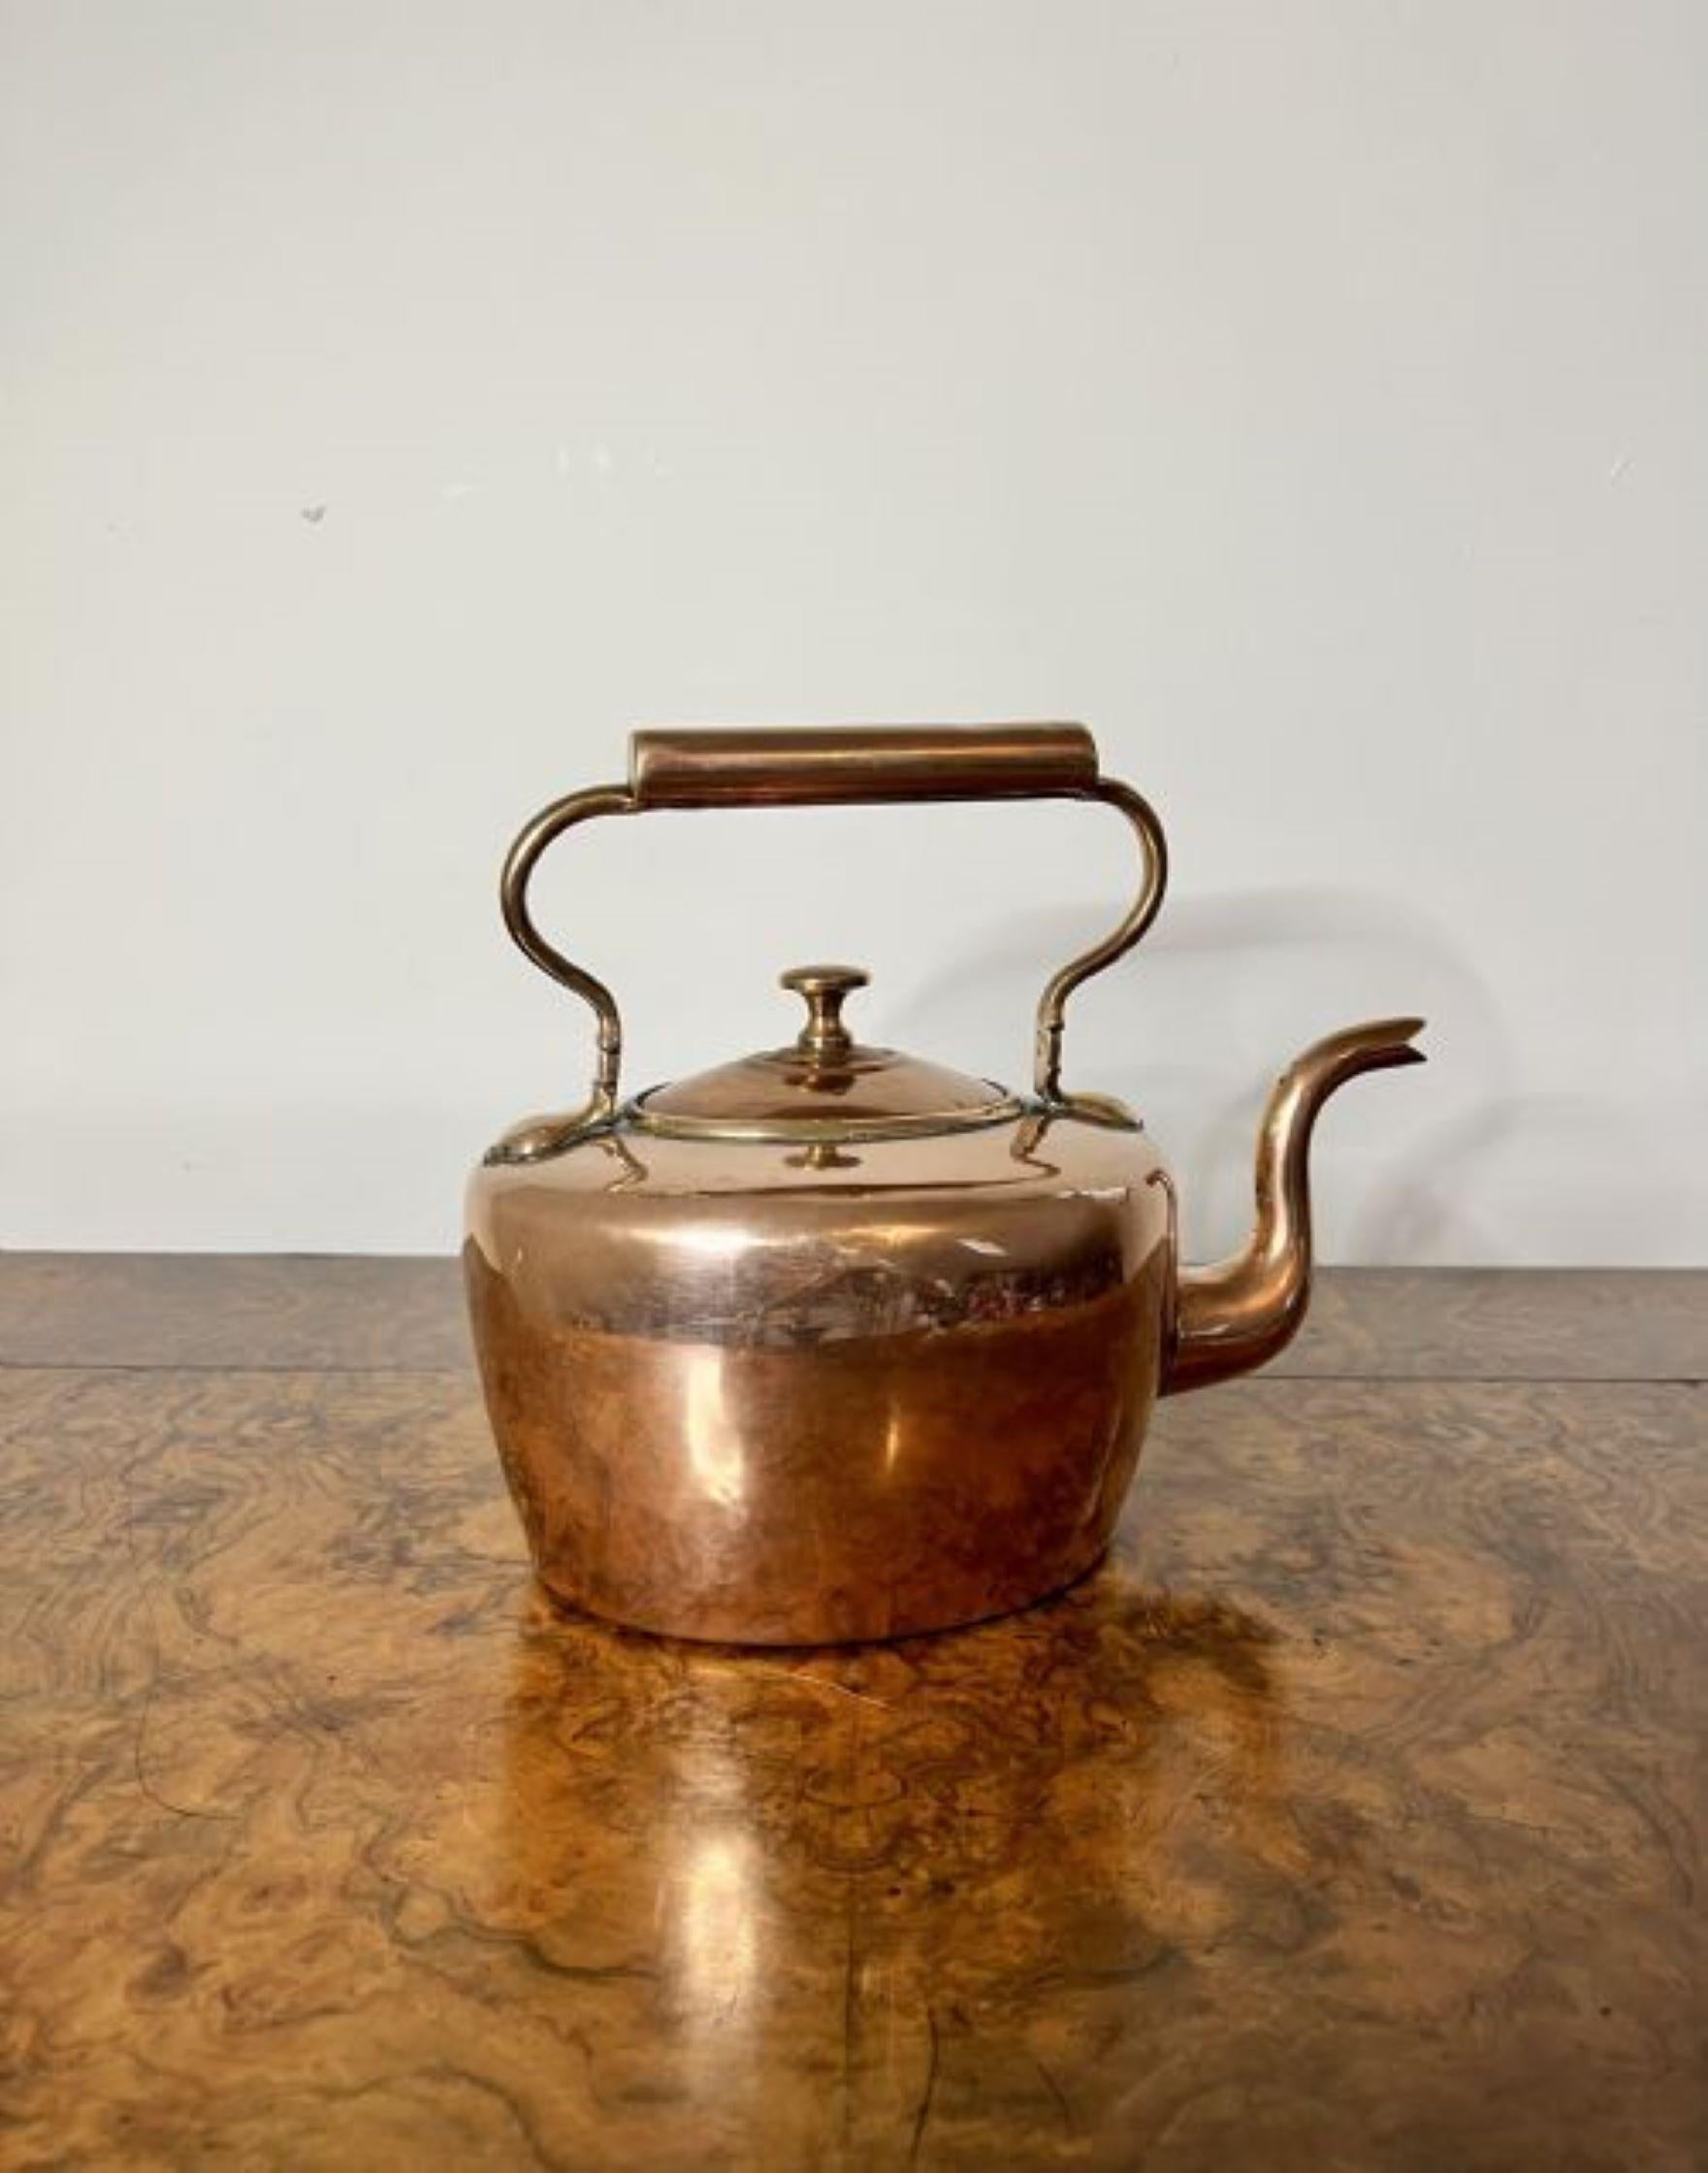 Quality antique George III small copper kettle having a quality George III copper kettle with a removable lid with the original copper knob, a shaped spout and a handle to the top.